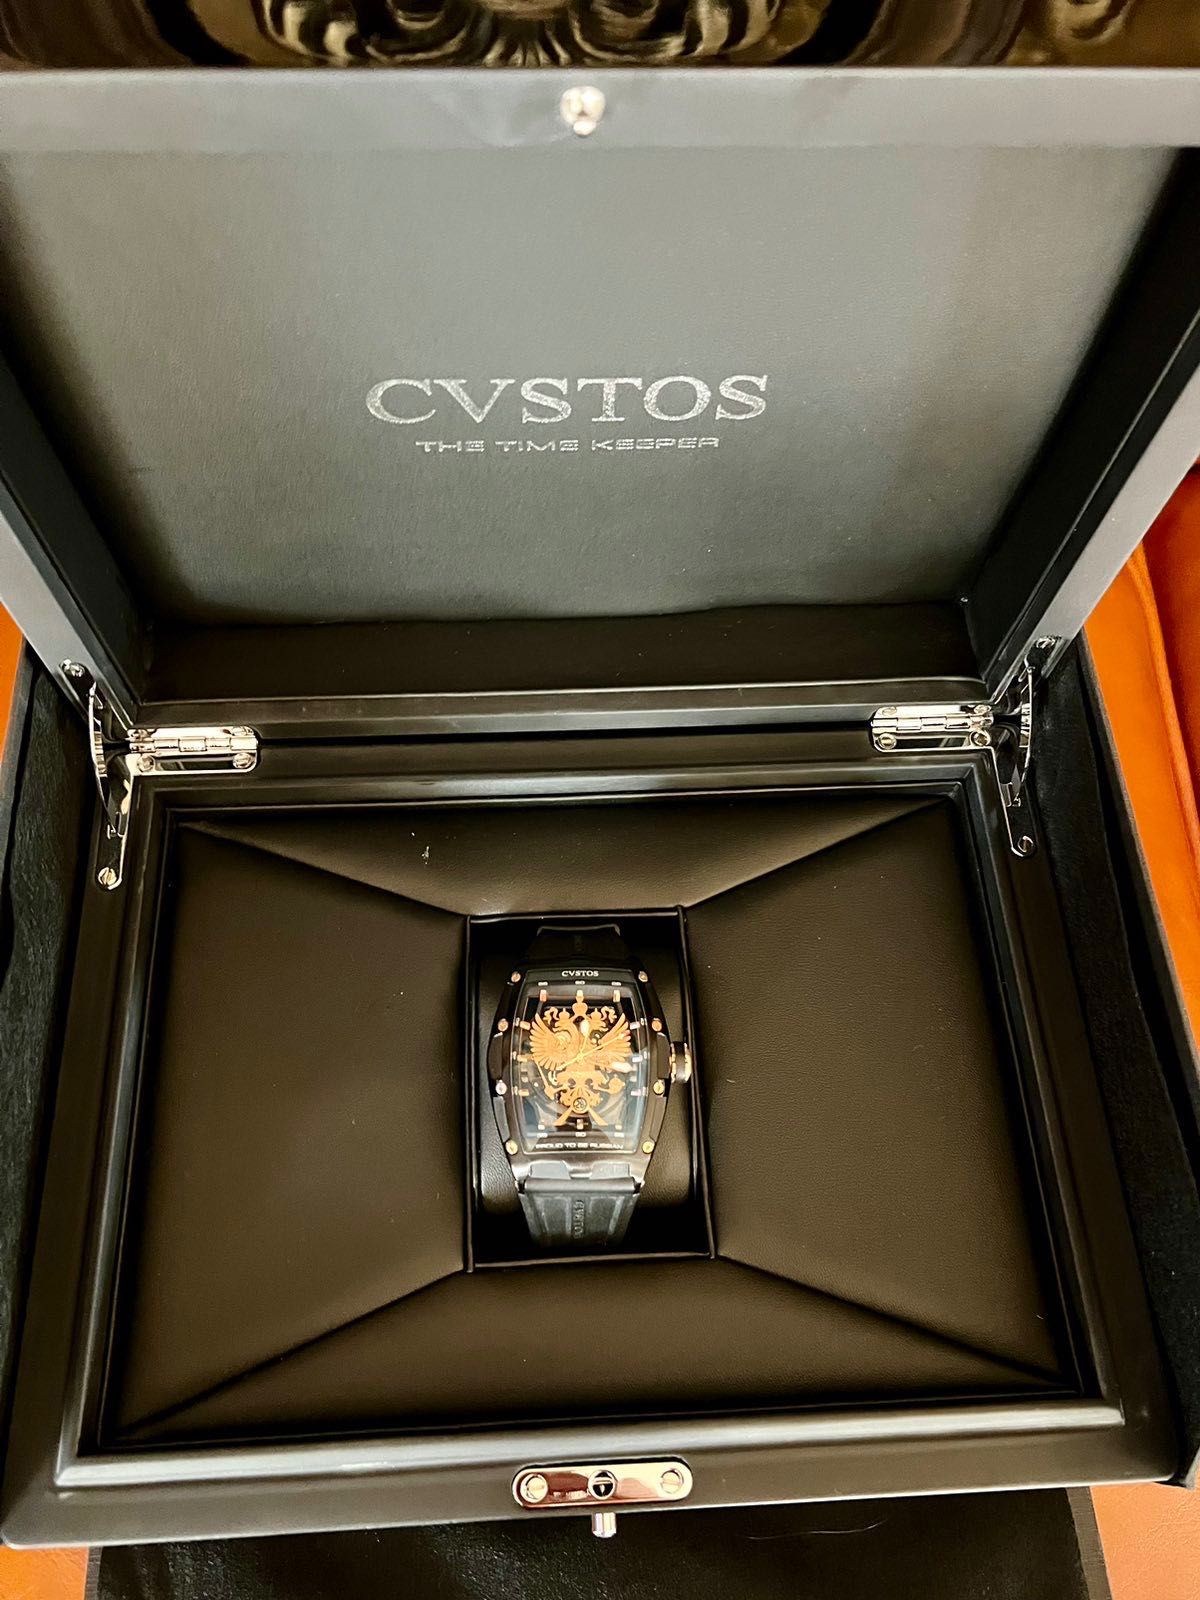 CVSTOS Challenge Proud To Be Russian LIMITED EDITION